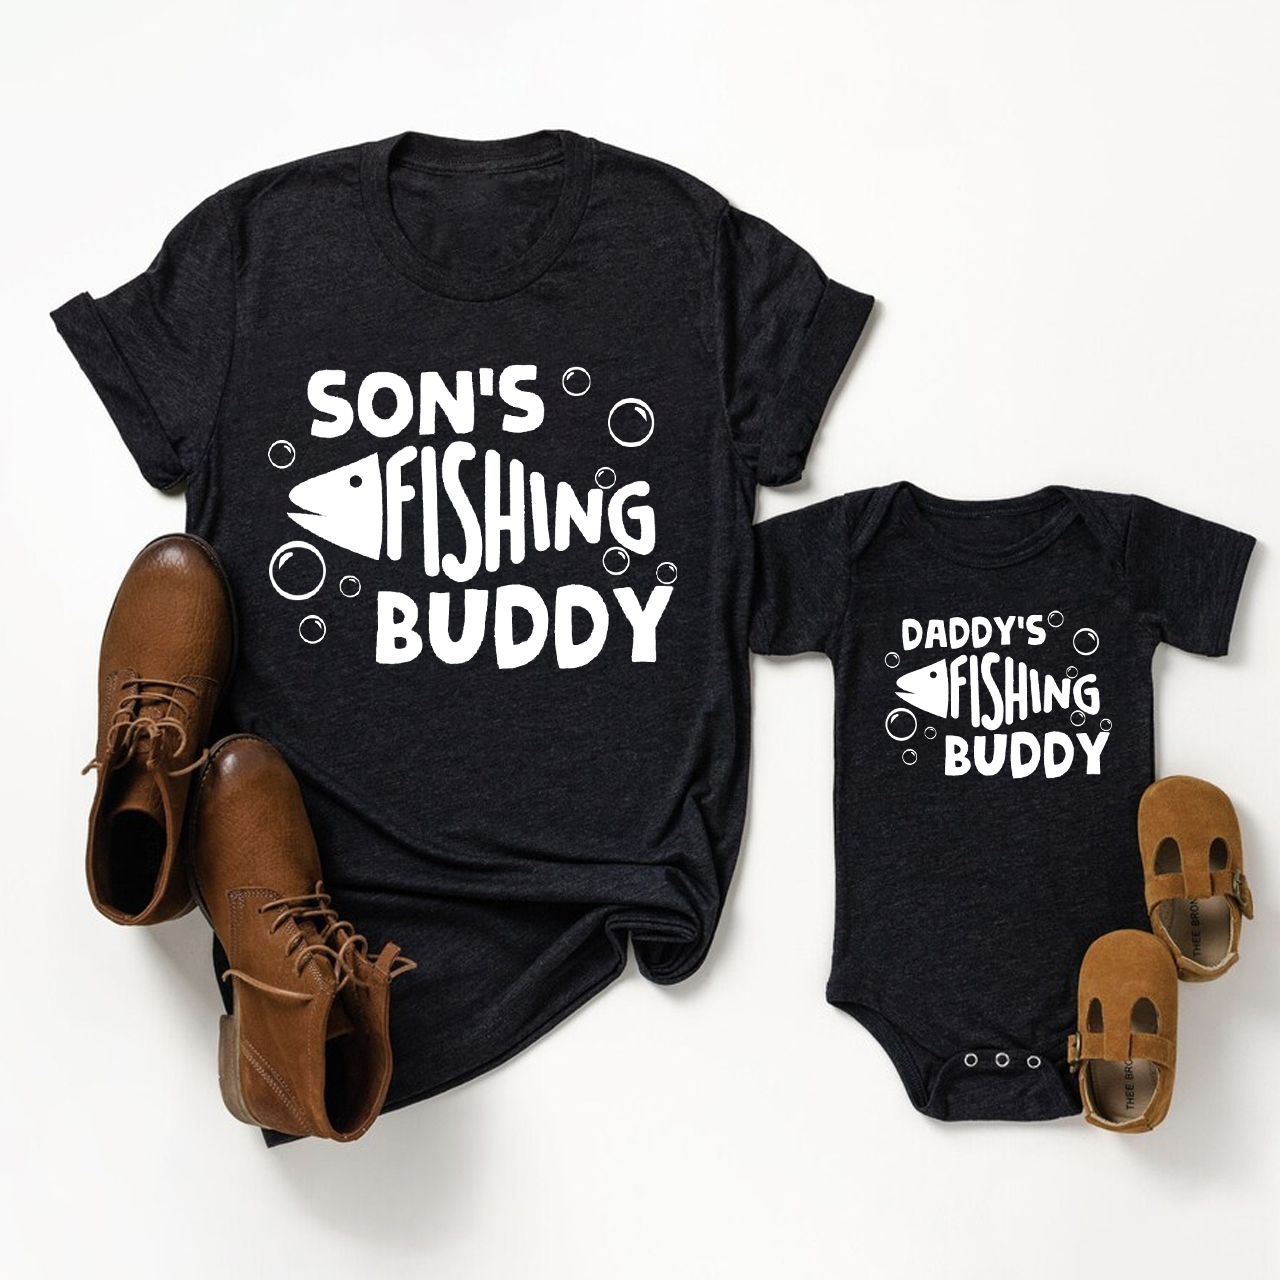 Daddy's Fishing Buddy Matching Tees For Dad & Me